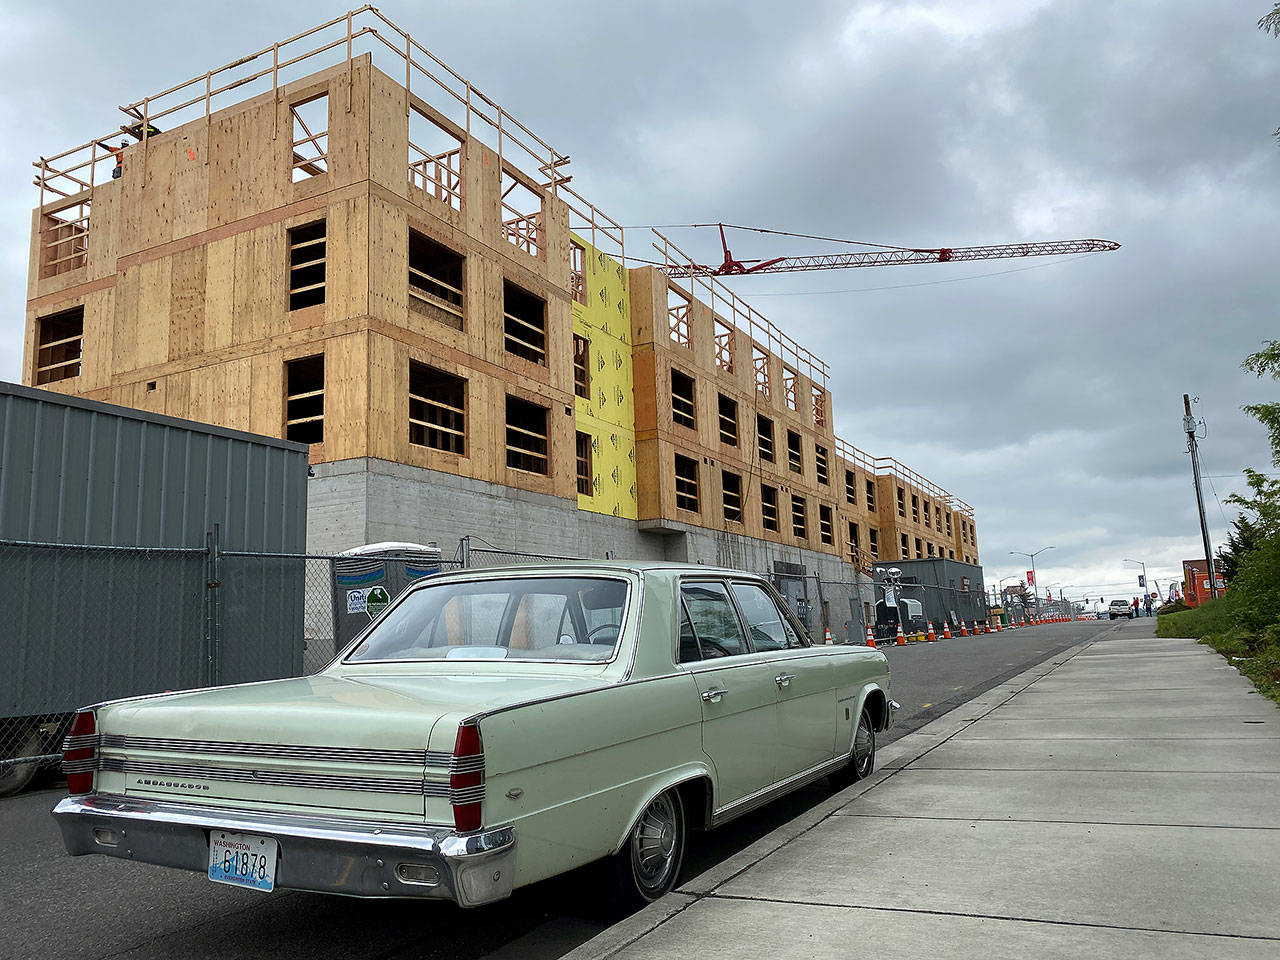 Gov. Jay Inslee has allowed the resumption of construction, and workers were busy Wednesday afternoon at this 5-story apartment project being built on North Broadway. (Sue Misao / The Herald)